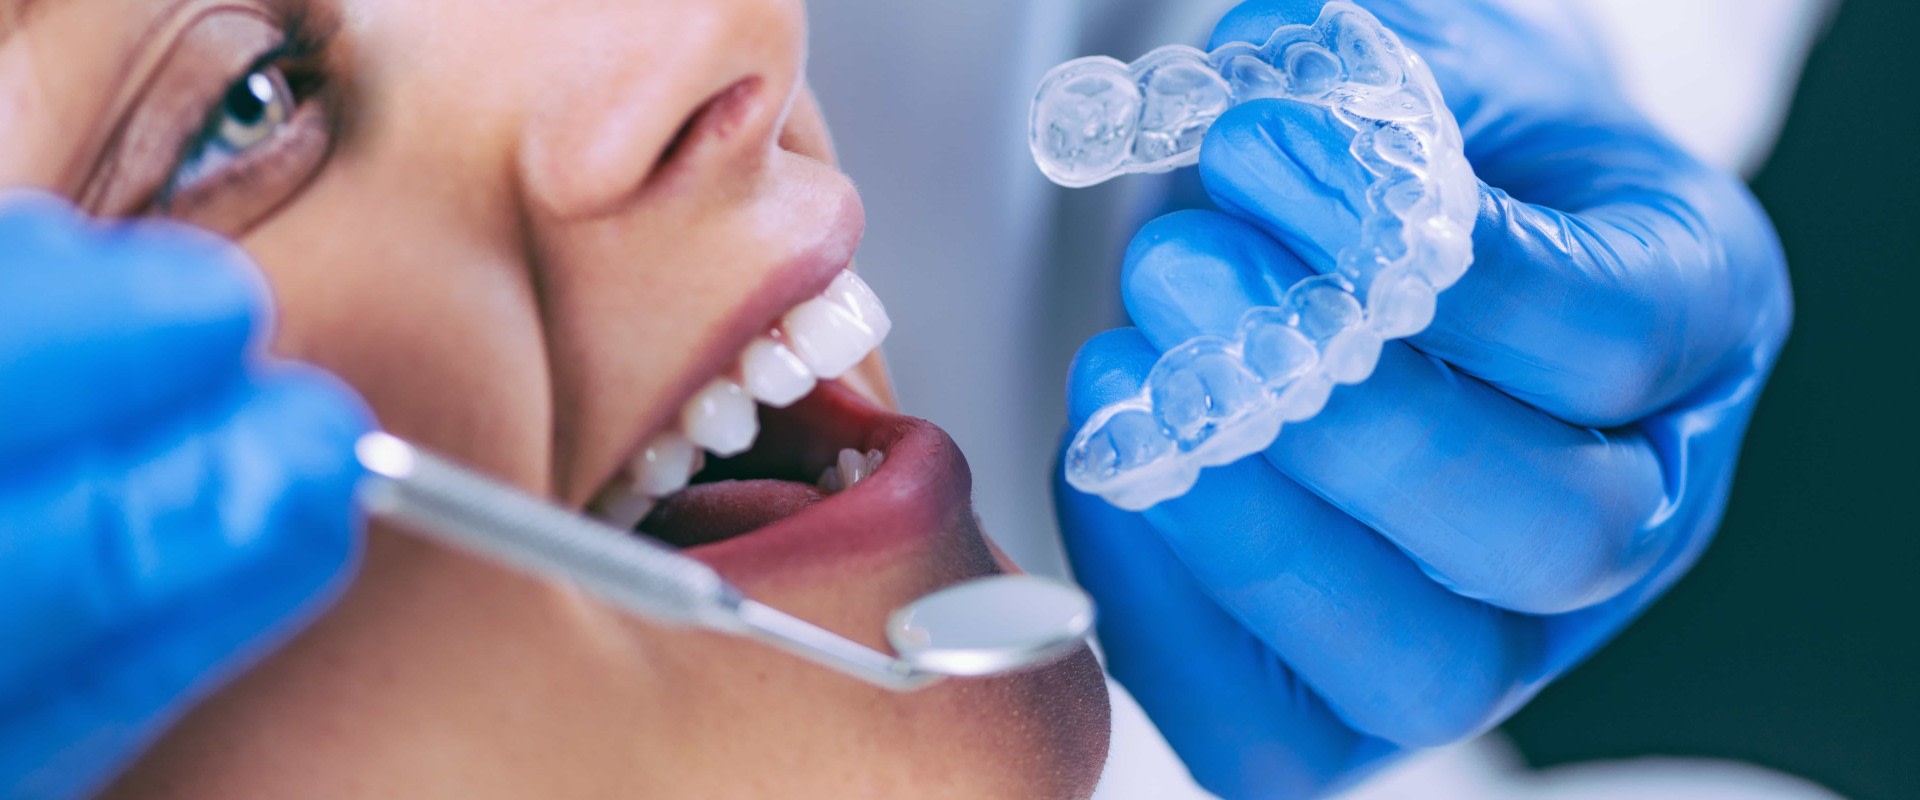 Preventive Health Care In Austin: Transform Your Smile With The Best Dentist For Quality Teeth Whitening Services